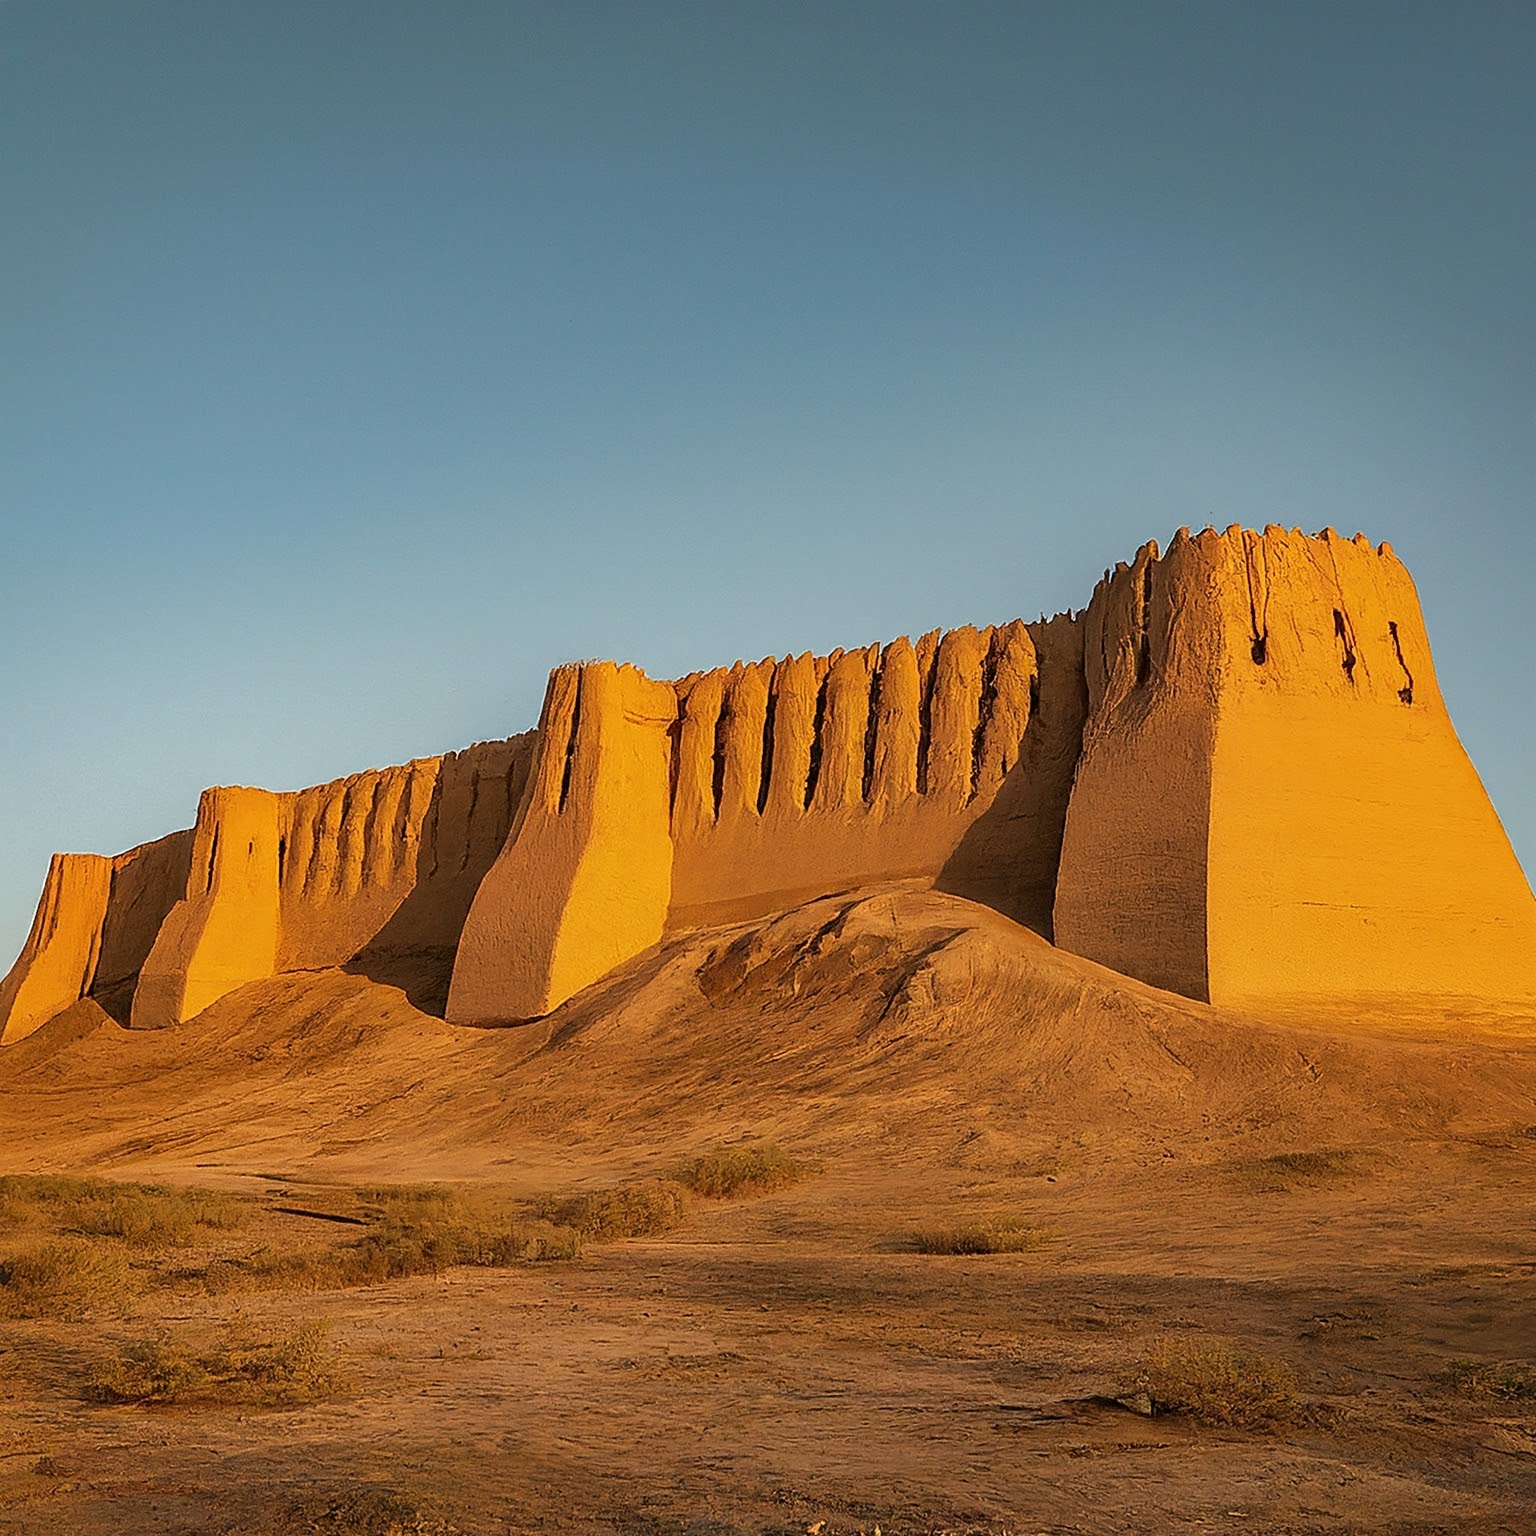 Great Kyz Kala Fortress in Merv, Turkmenistan, with mudbrick walls and towers.